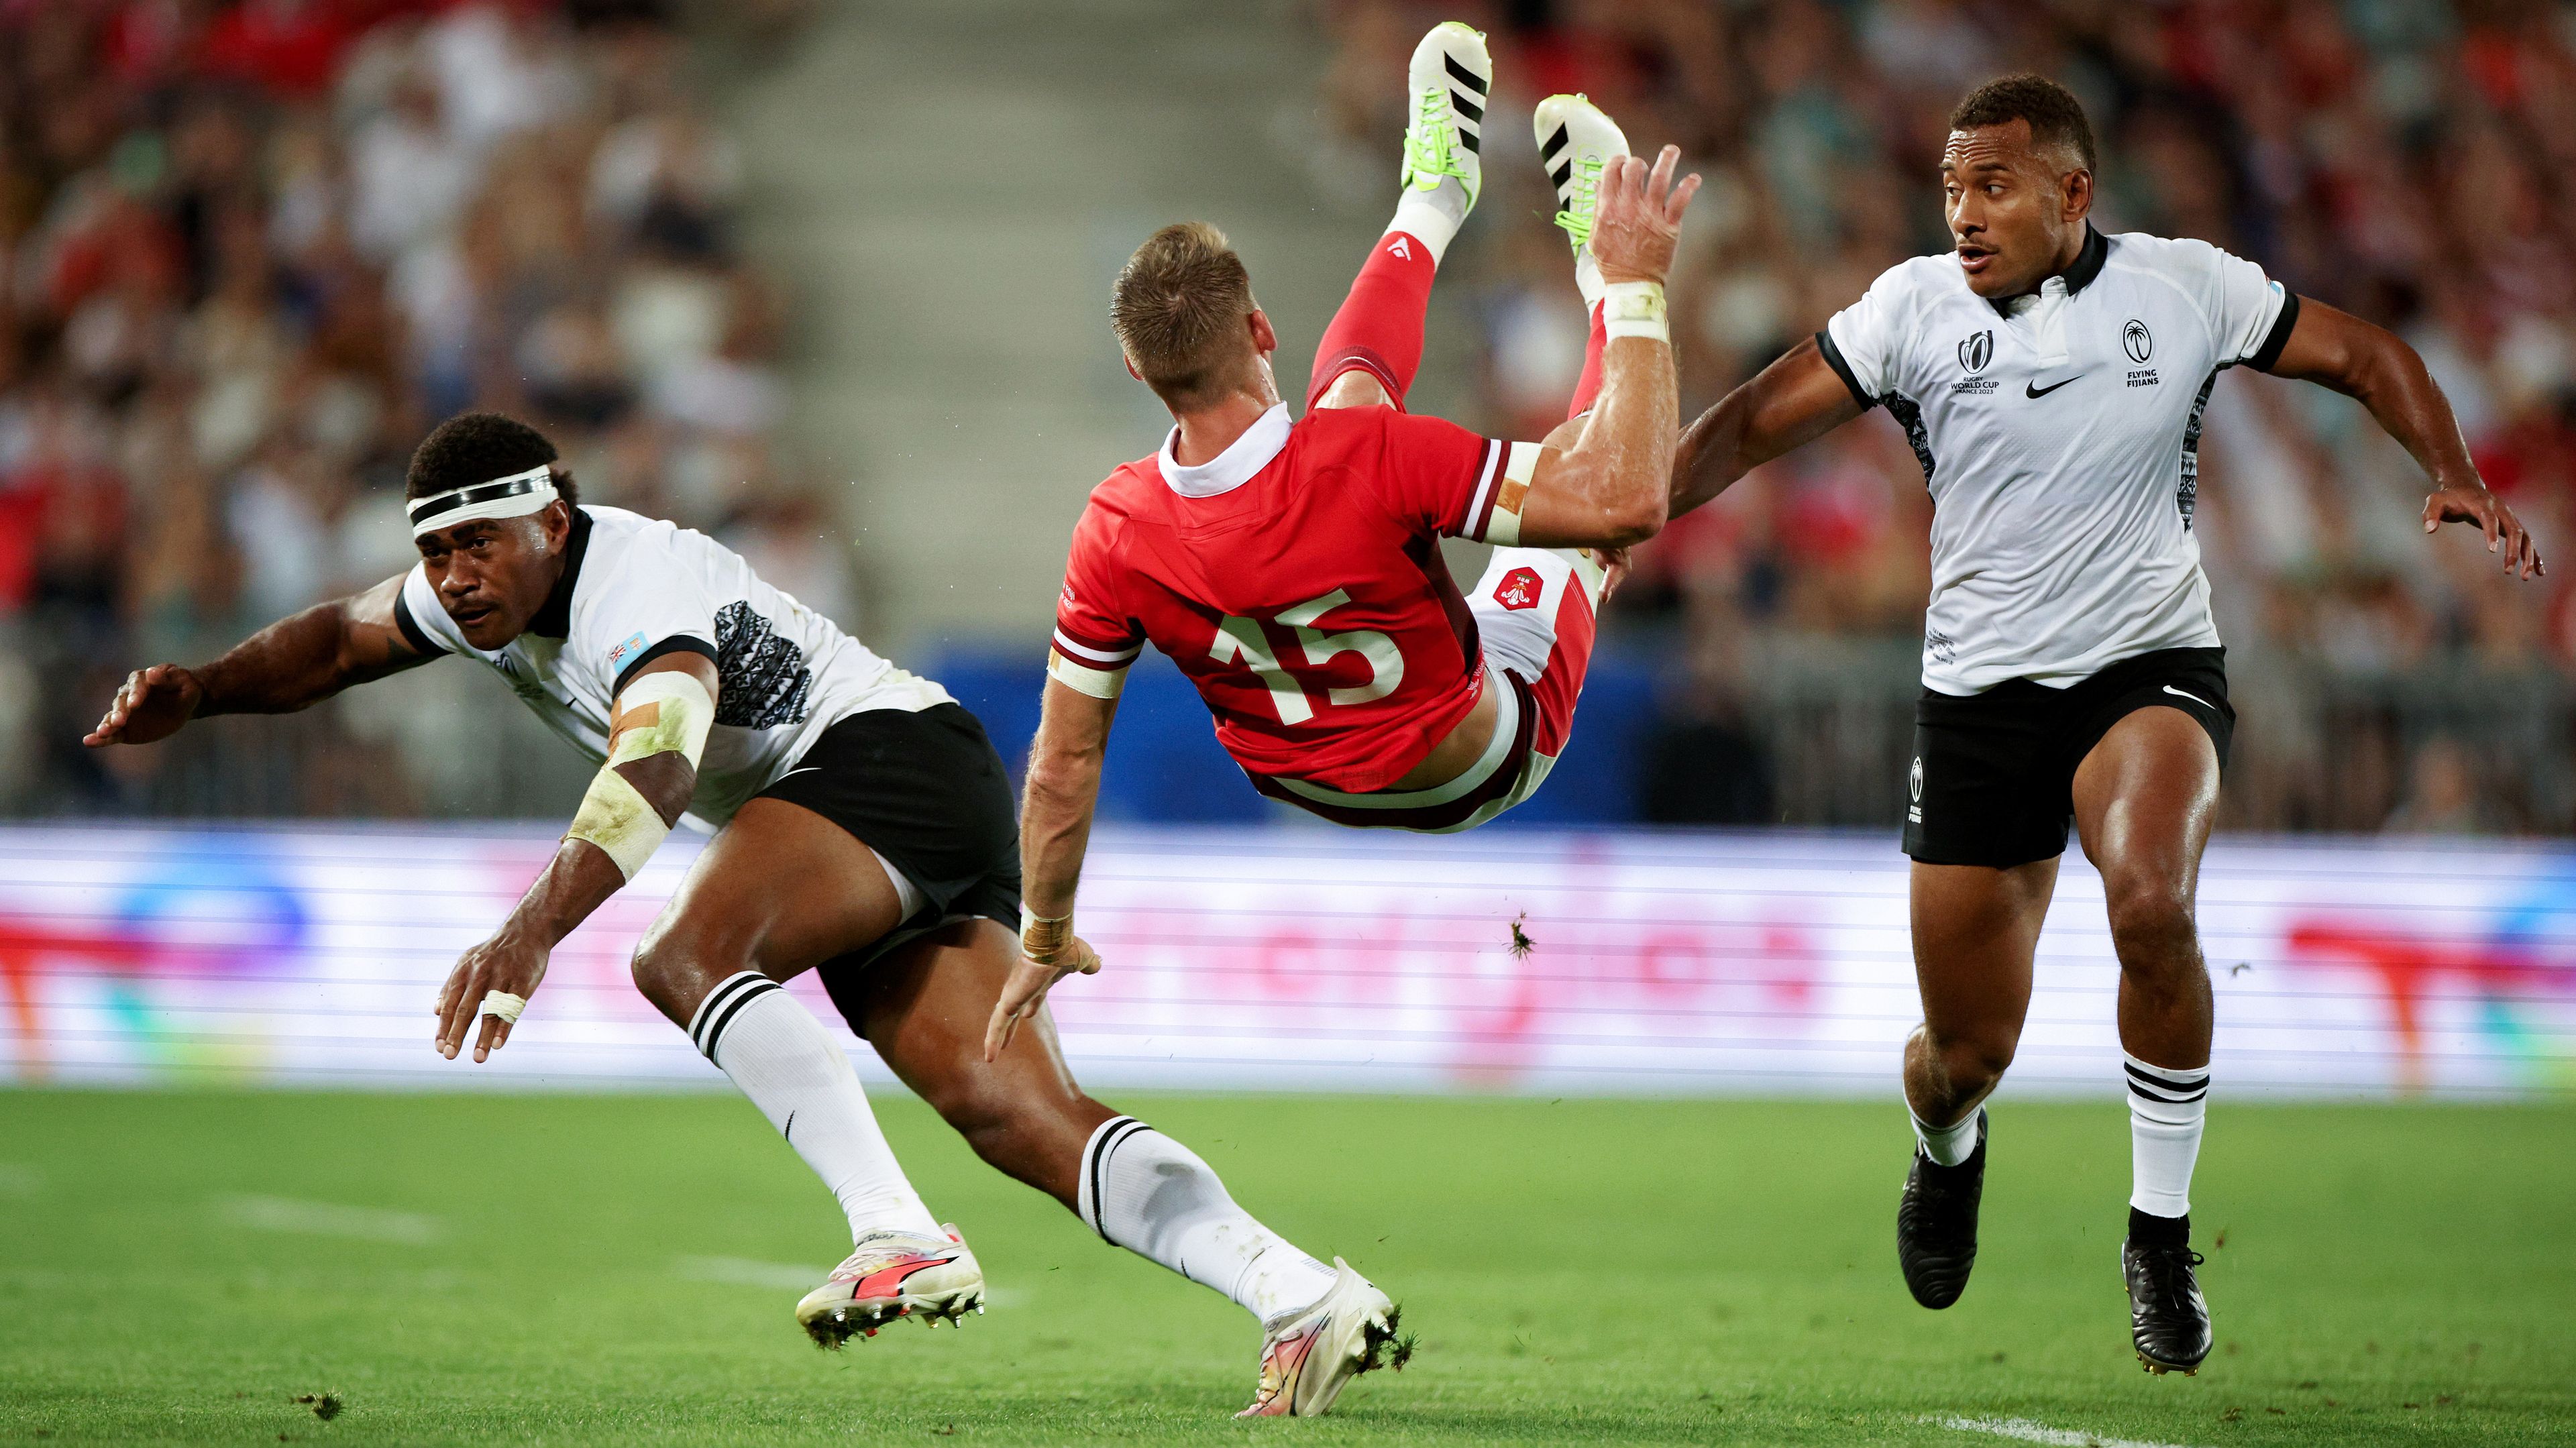 Vinaya Habosi of Fiji commits an illegal no arms challenge on Liam Williams of Wales.